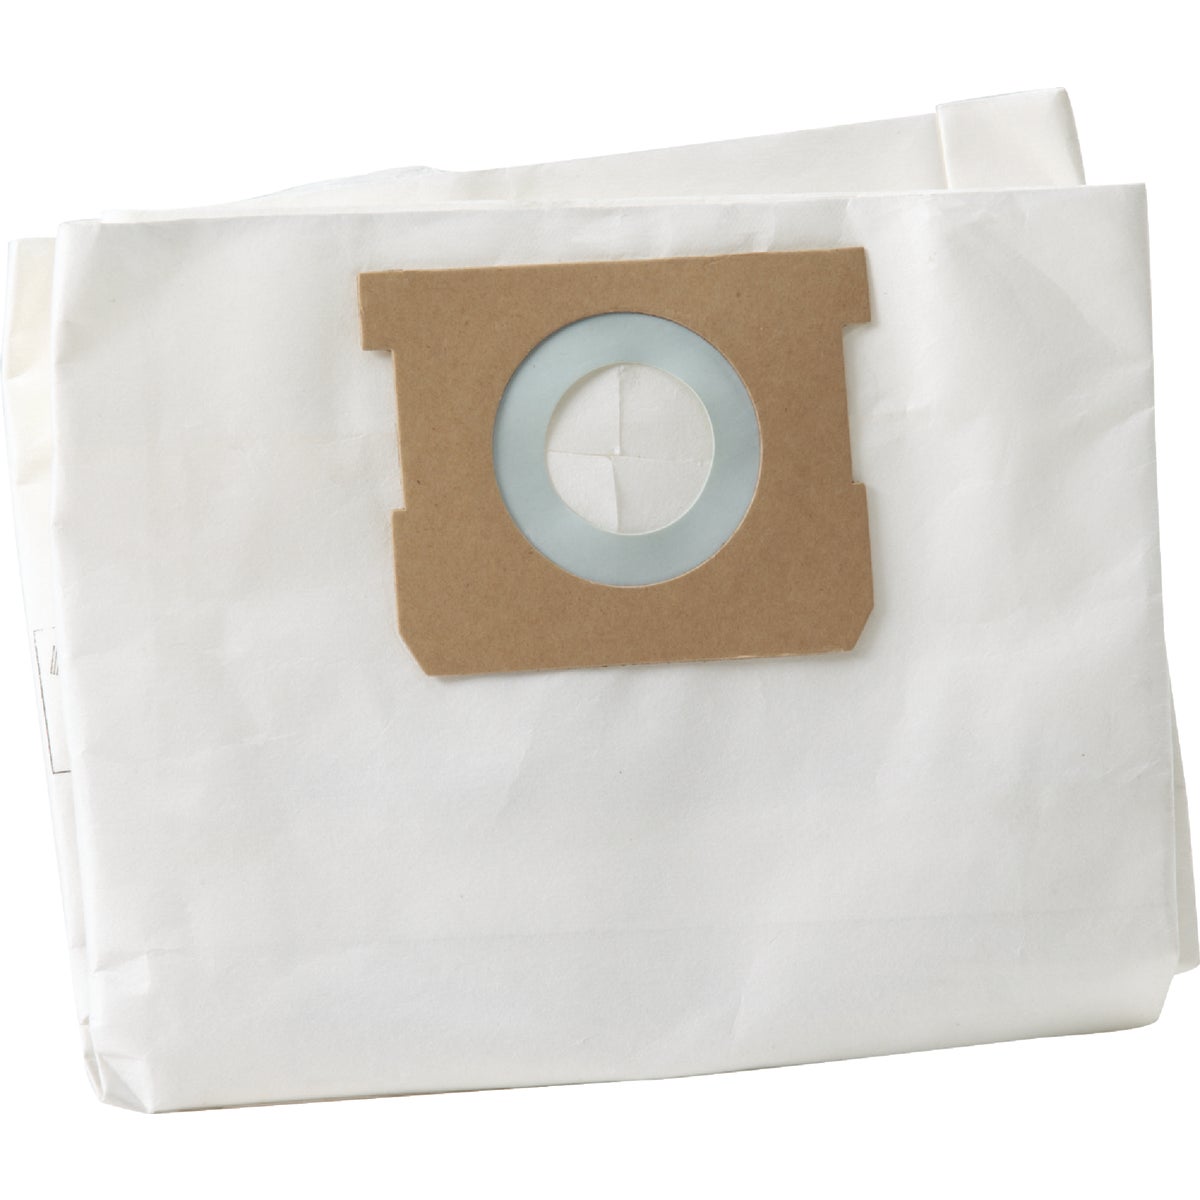 Channellock Paper Standard 8 to 10 Gal. Filter Vacuum Bag (3-Pack)